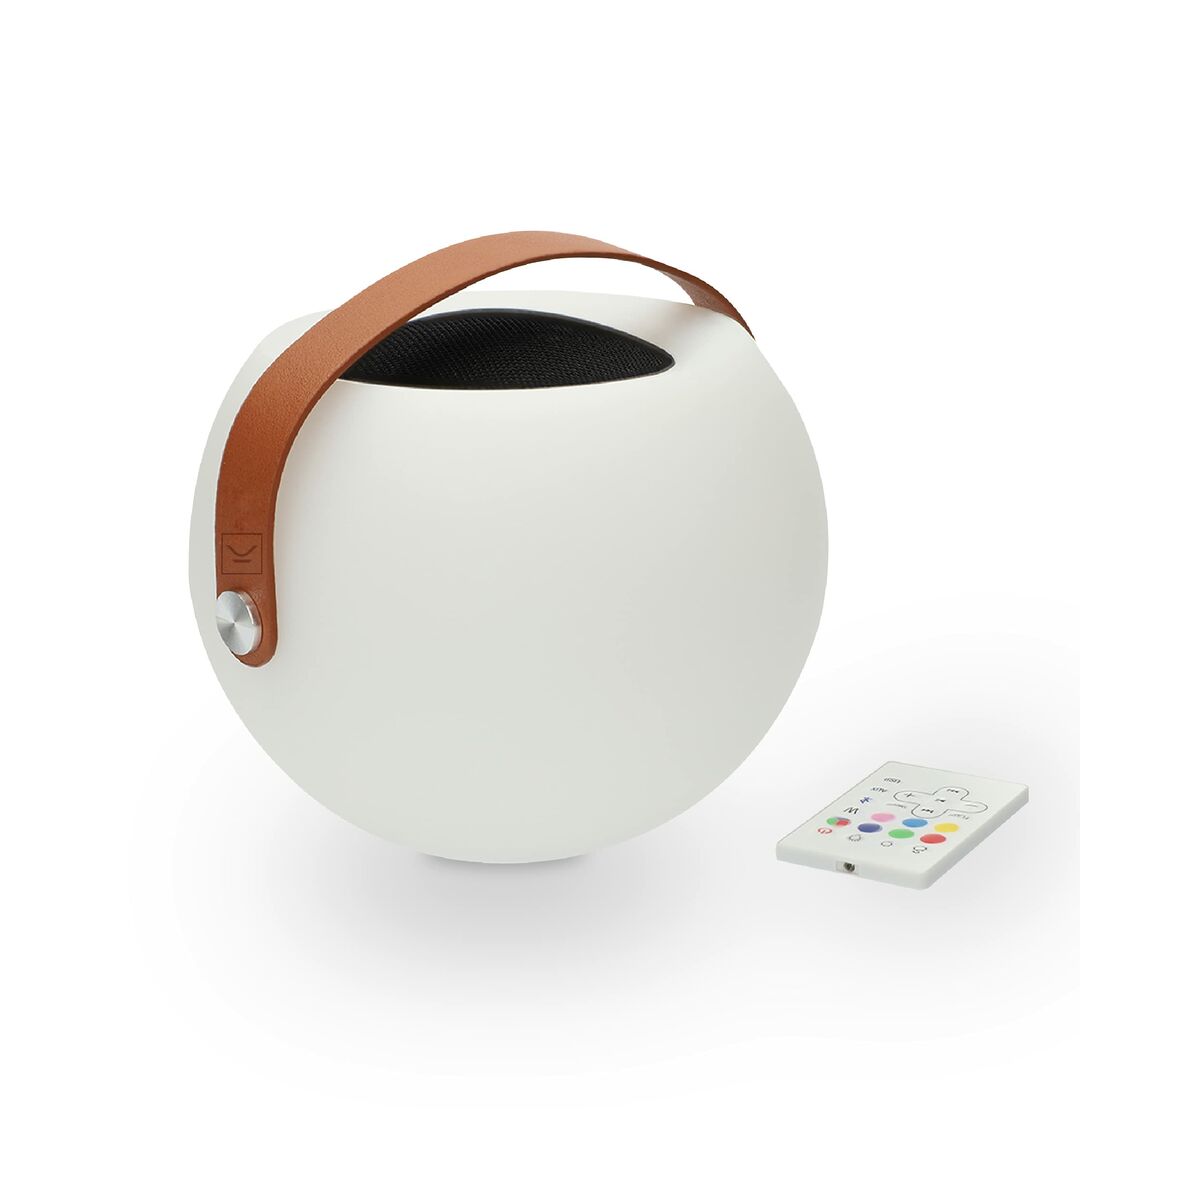 Bluetooth loudspeaker with LED light KSIX Bubble White 5 W Portable, KSIX, Electronics, Mobile communication and accessories, bluetooth-loudspeaker-with-led-light-ksix-bubble-white-laptop, Brand_KSIX, category-reference-2609, category-reference-2882, category-reference-2923, category-reference-t-19653, category-reference-t-21311, category-reference-t-4036, category-reference-t-4037, Condition_NEW, entertainment, music, Price_50 - 100, telephones & tablets, wifi y bluetooth, RiotNook